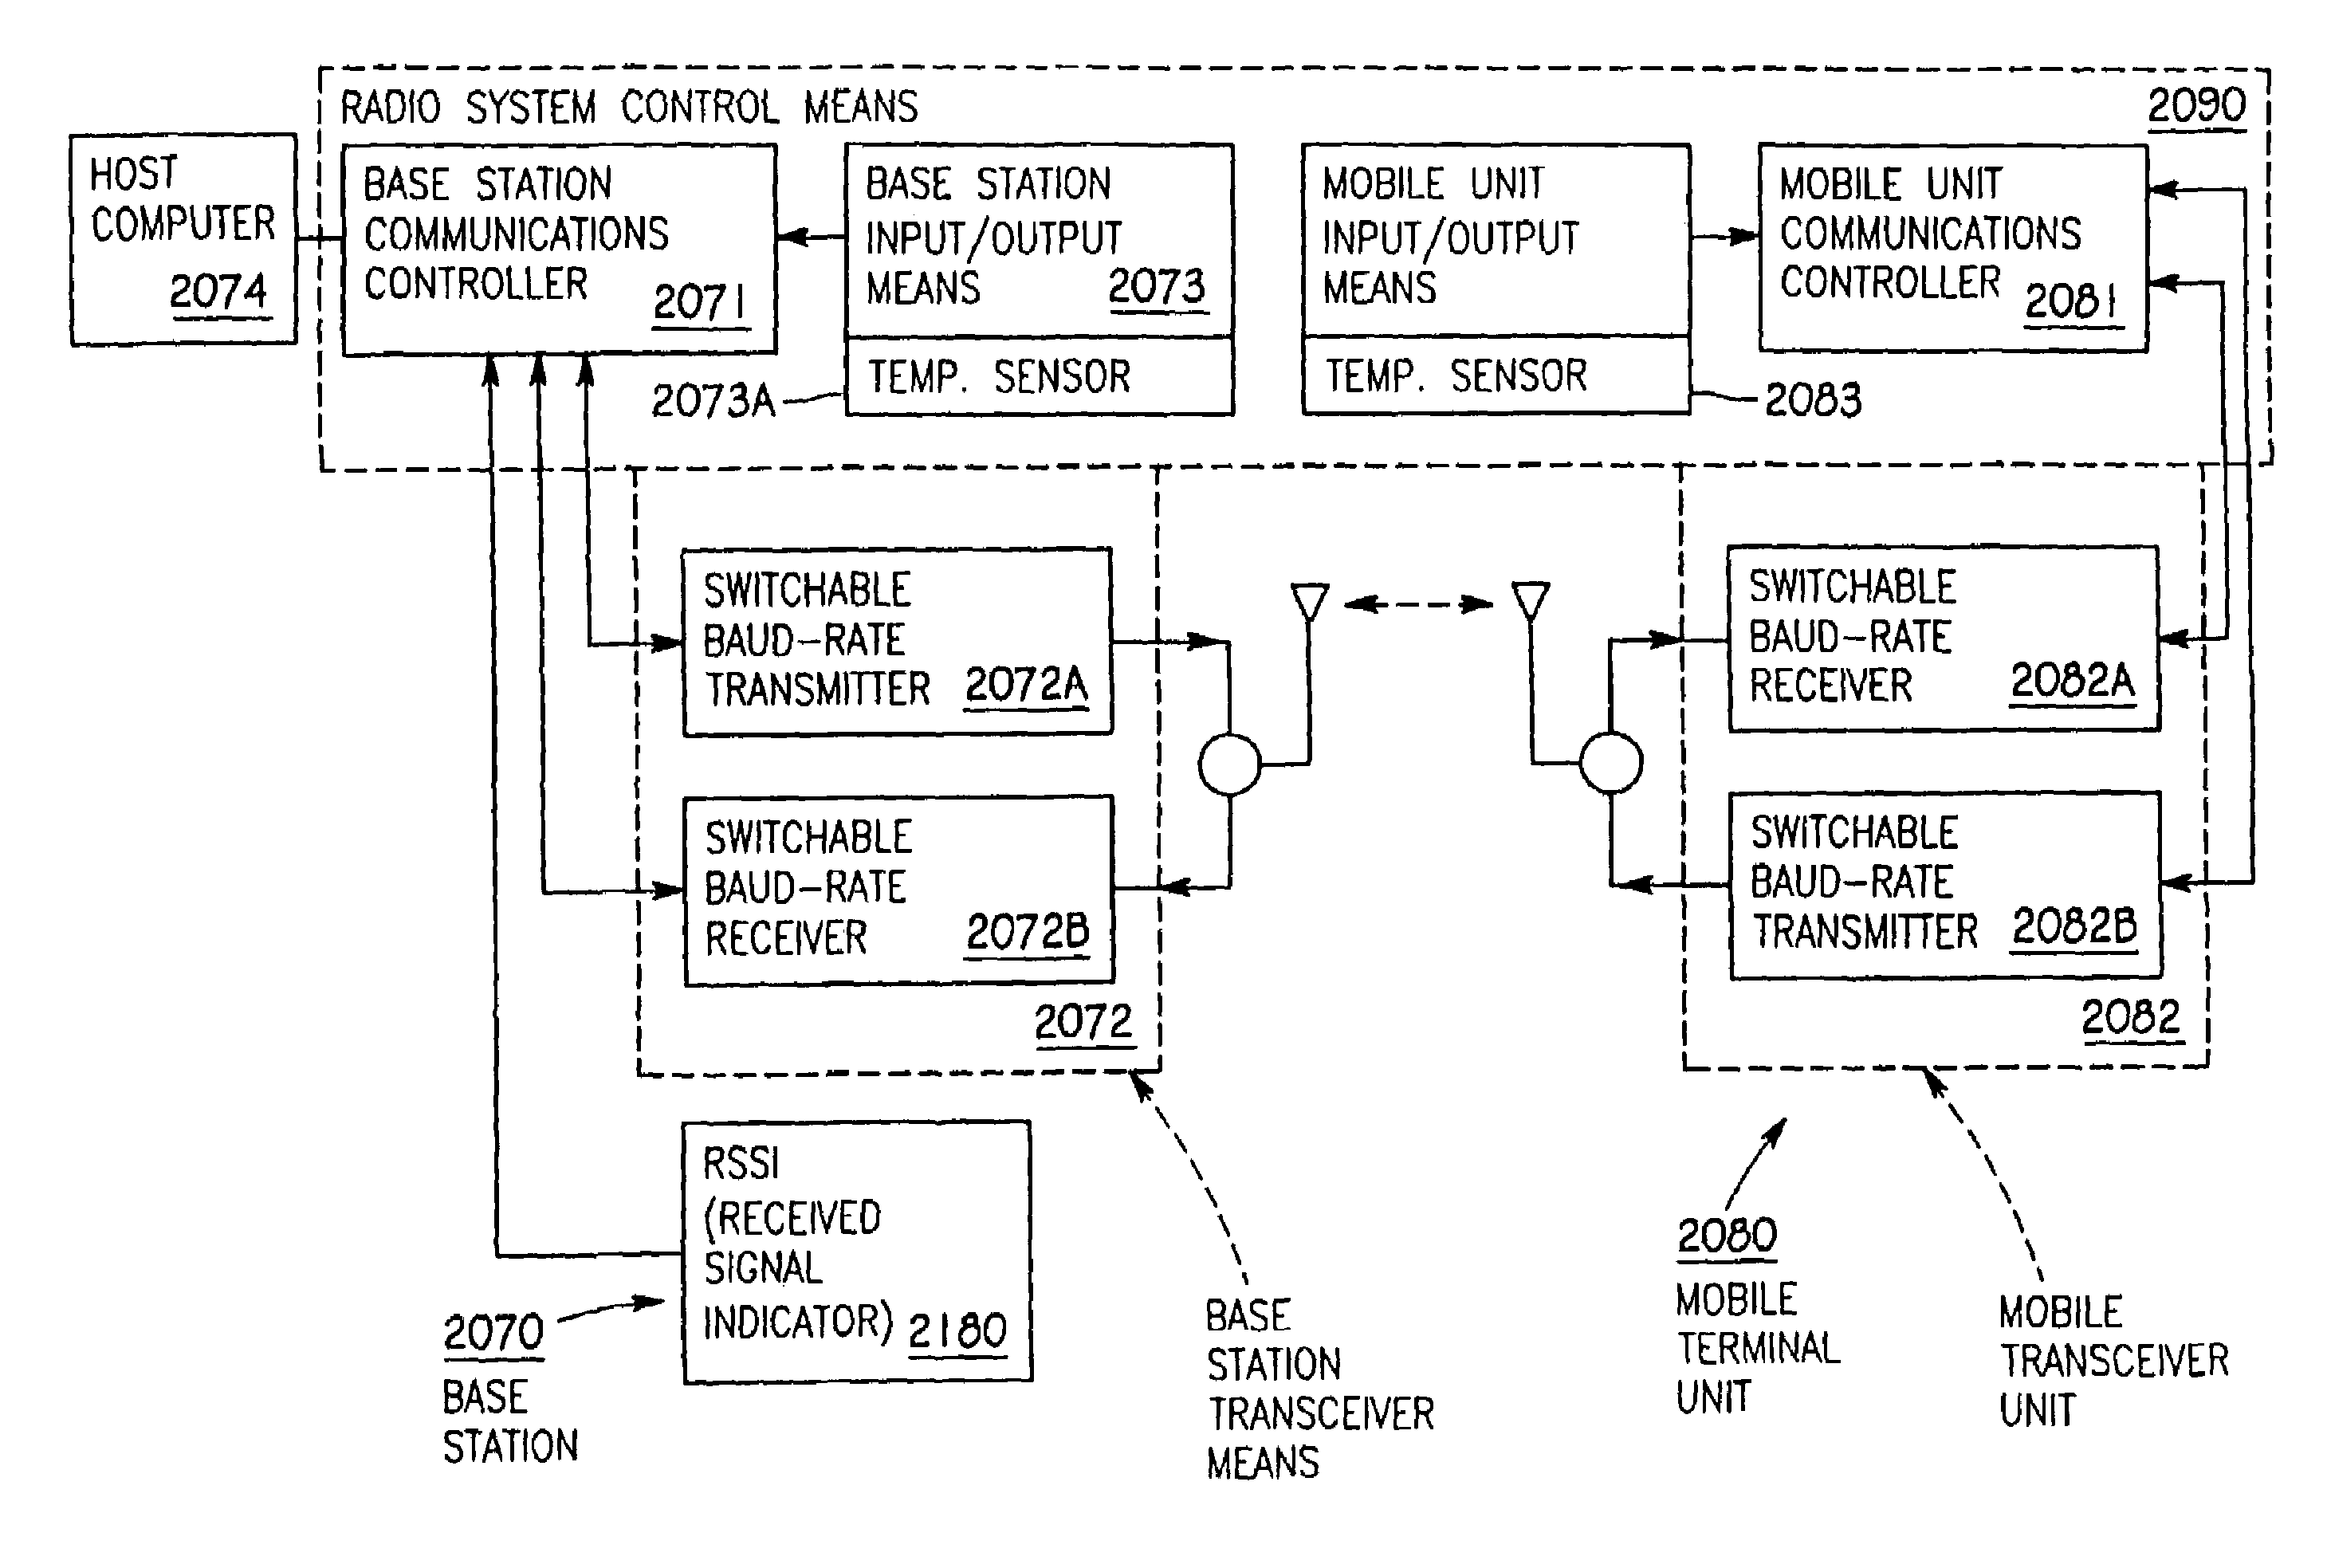 Remote radio data communication system with data rate switching